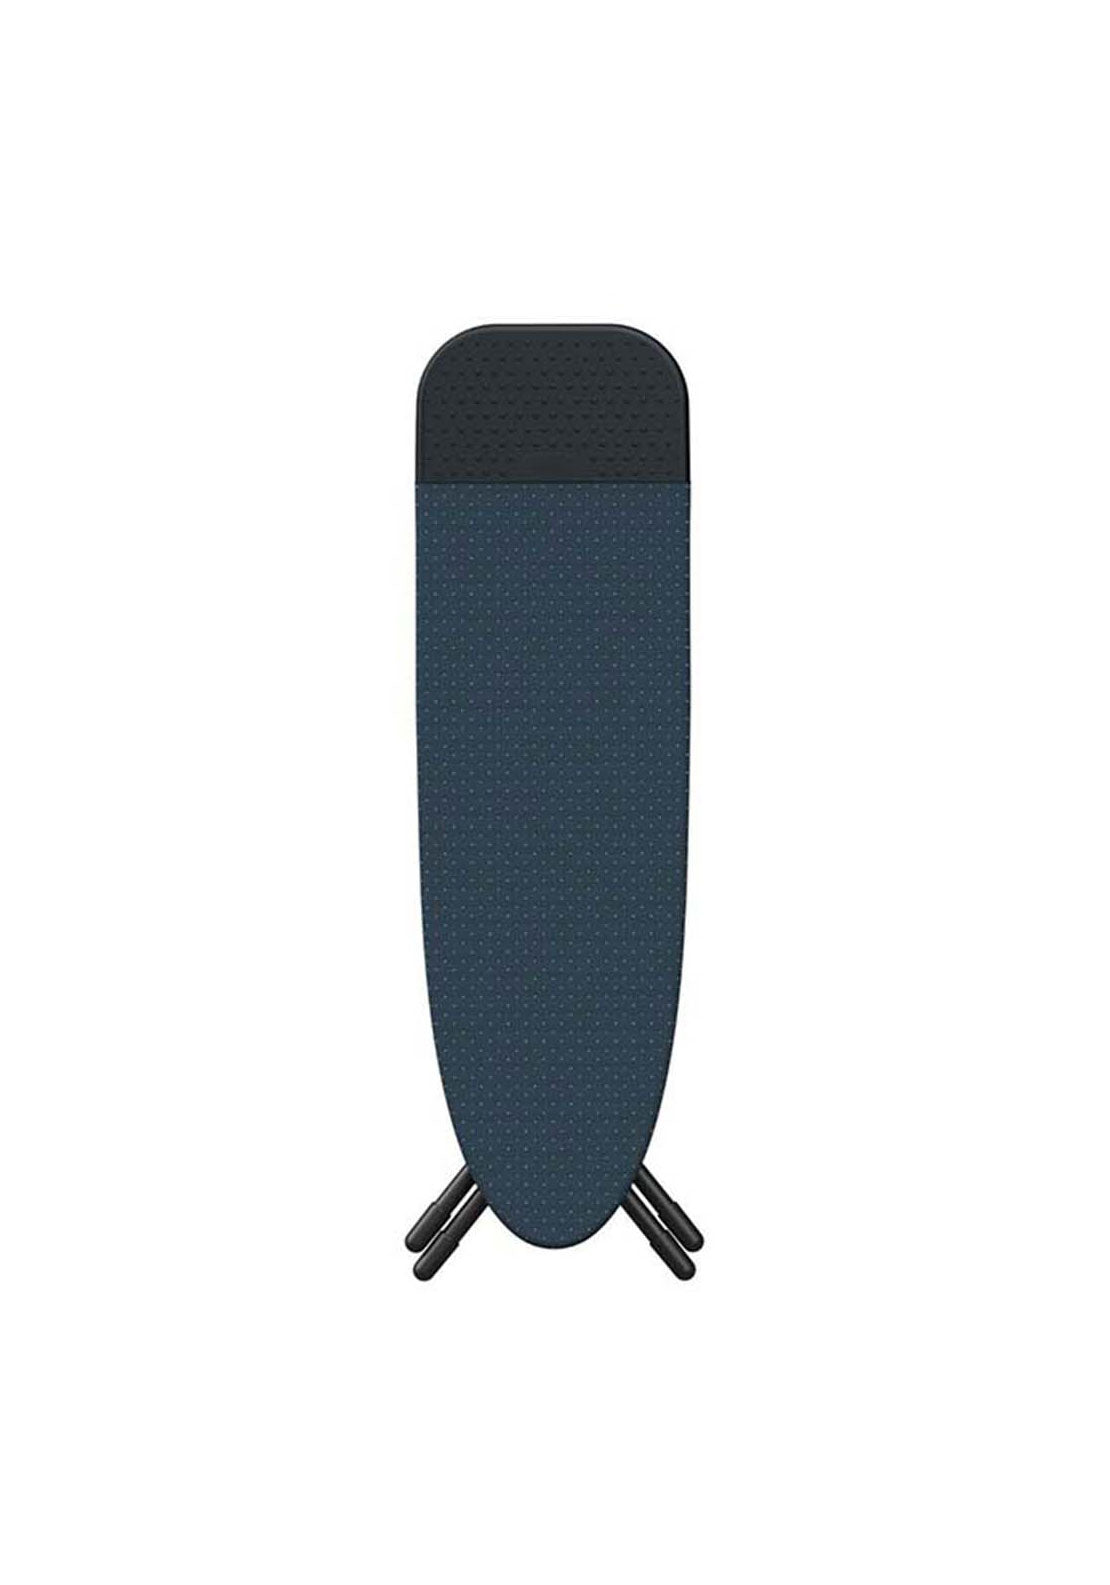 Joseph Joseph Glide Plus Easy Store Ironing Board With Cover | 50006JJ 5 Shaws Department Stores